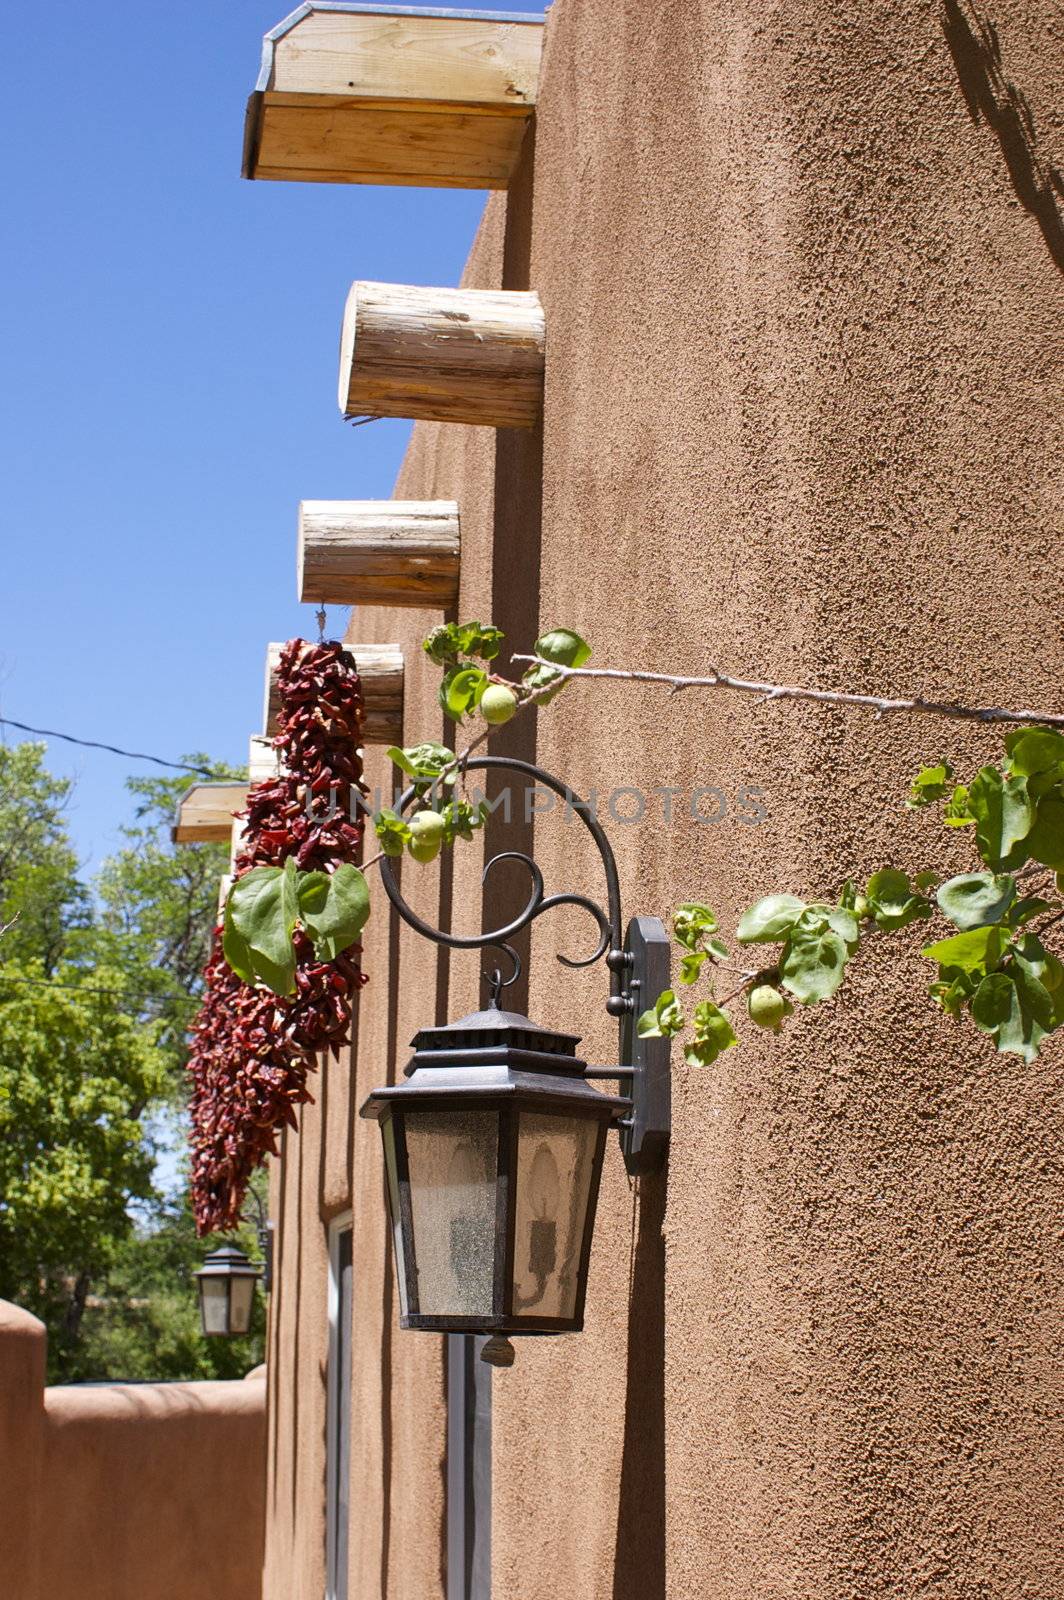 New Mexico adobe building featuring chili ristras, a lamp and foliage, against a blue sky, with copy space.